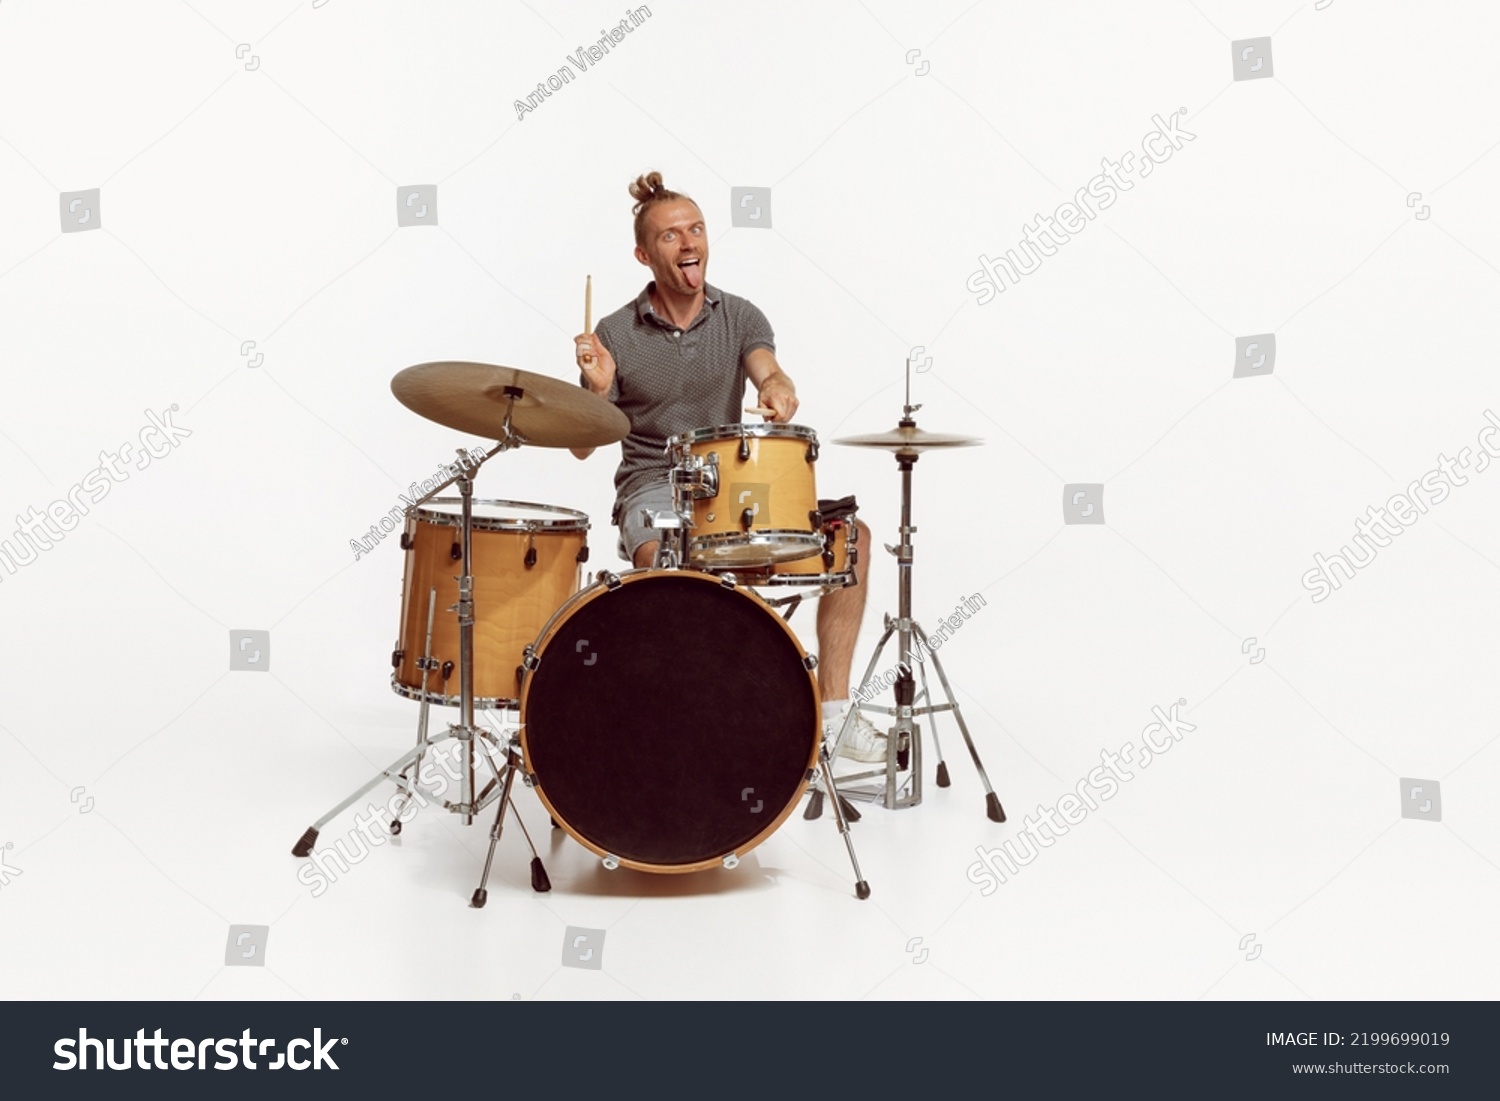 Portrait of funny emotive man playing drums, performing isolated over white background. Bass, rock music. Concept of live music, performance, retro style, creativity, artistic lifestyle #2199699019